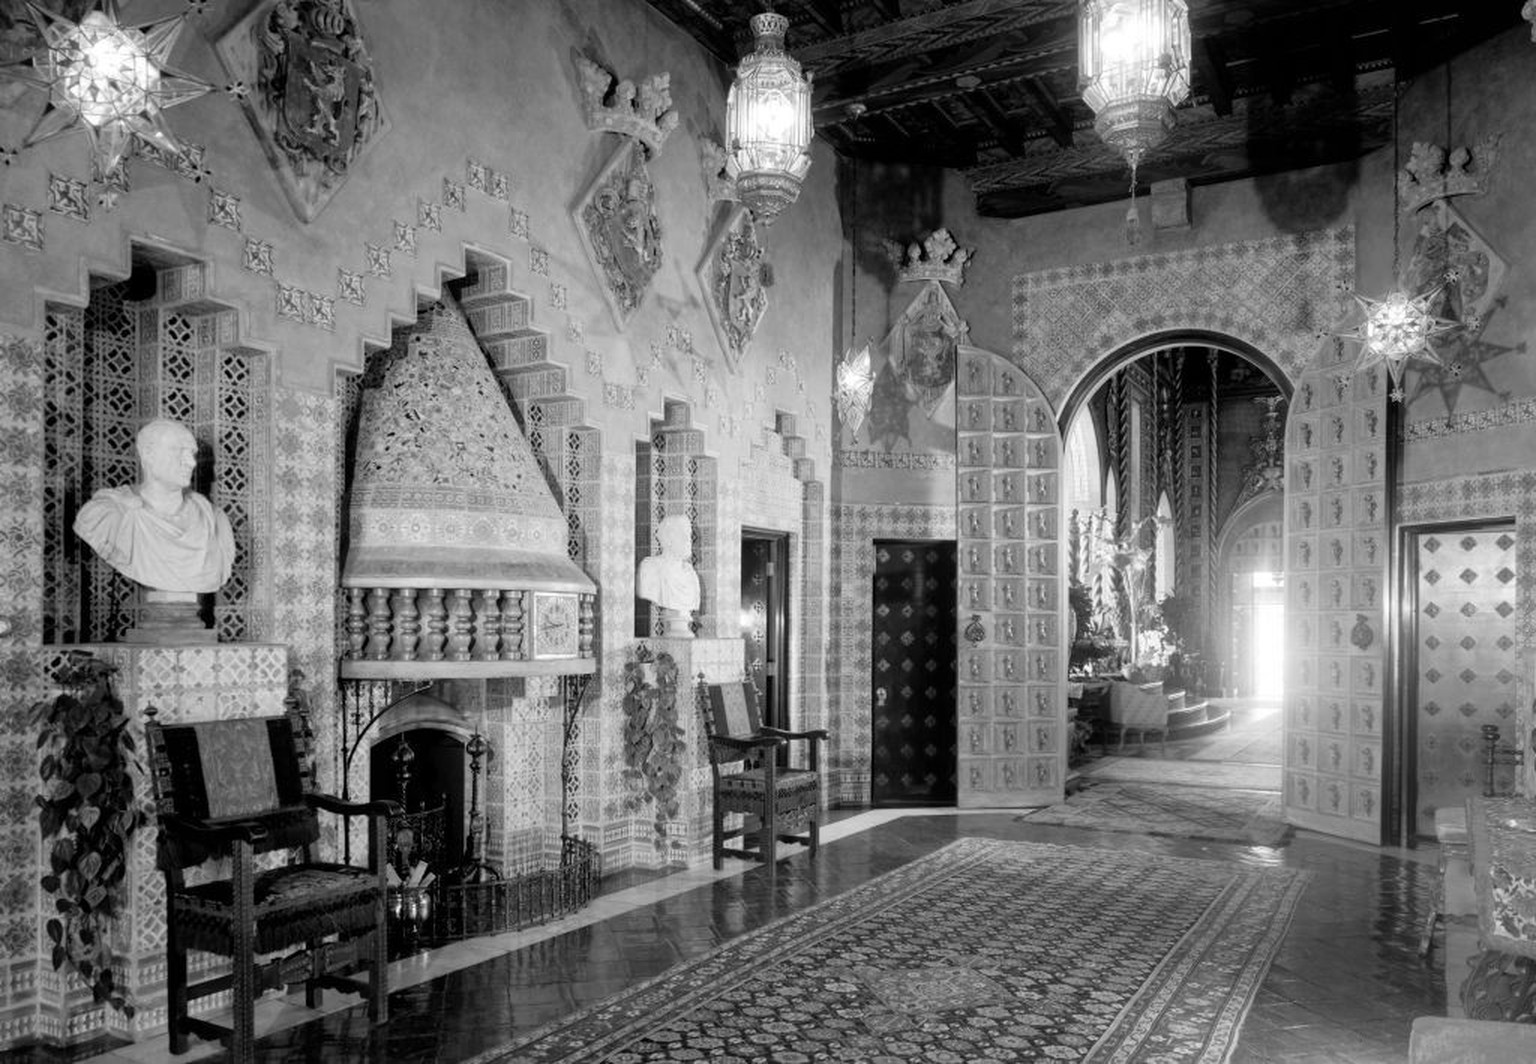 Interior of Mar-A-Lago, at 1100 South Ocean Boulevard in Palm Beach, Florida, 1967. The Mediterranean style villa was designed by architect Marion Sims Wyeth and is the home of noted philantropist and ...